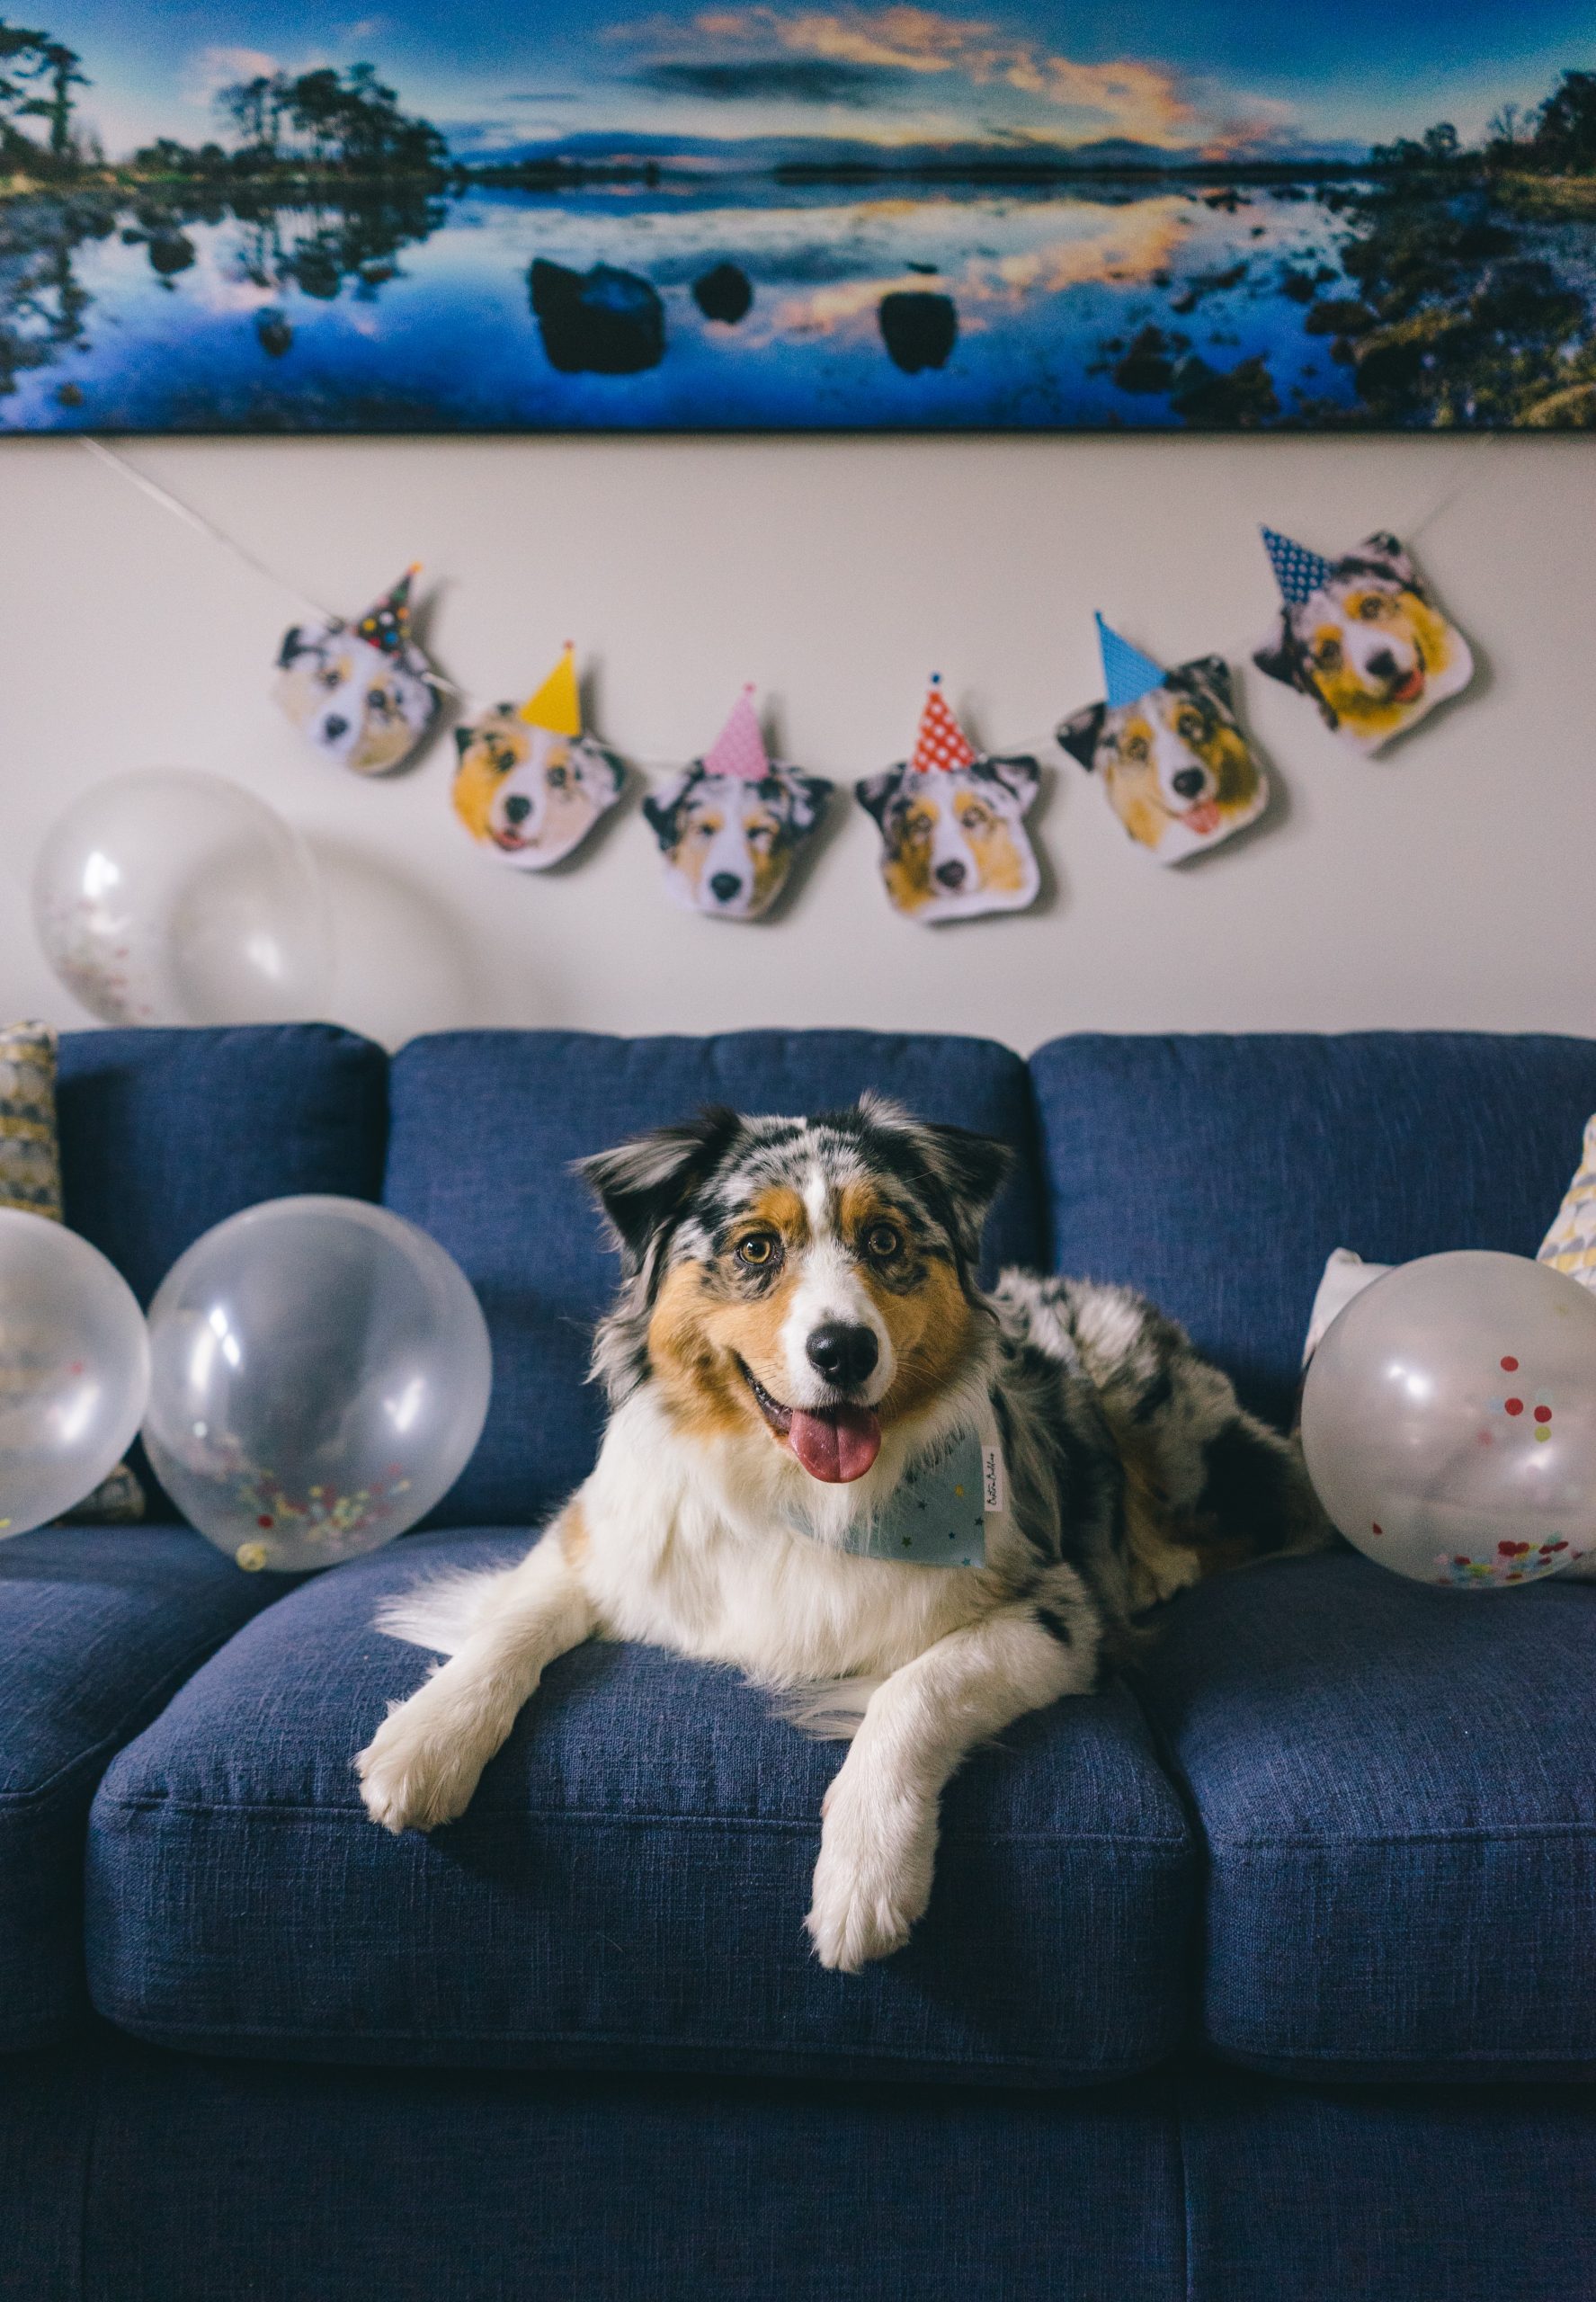 Australian shepherd on a blue couch with clear ballloons there's a birthday banner of other dogs on the wall and a lovely painting above that.